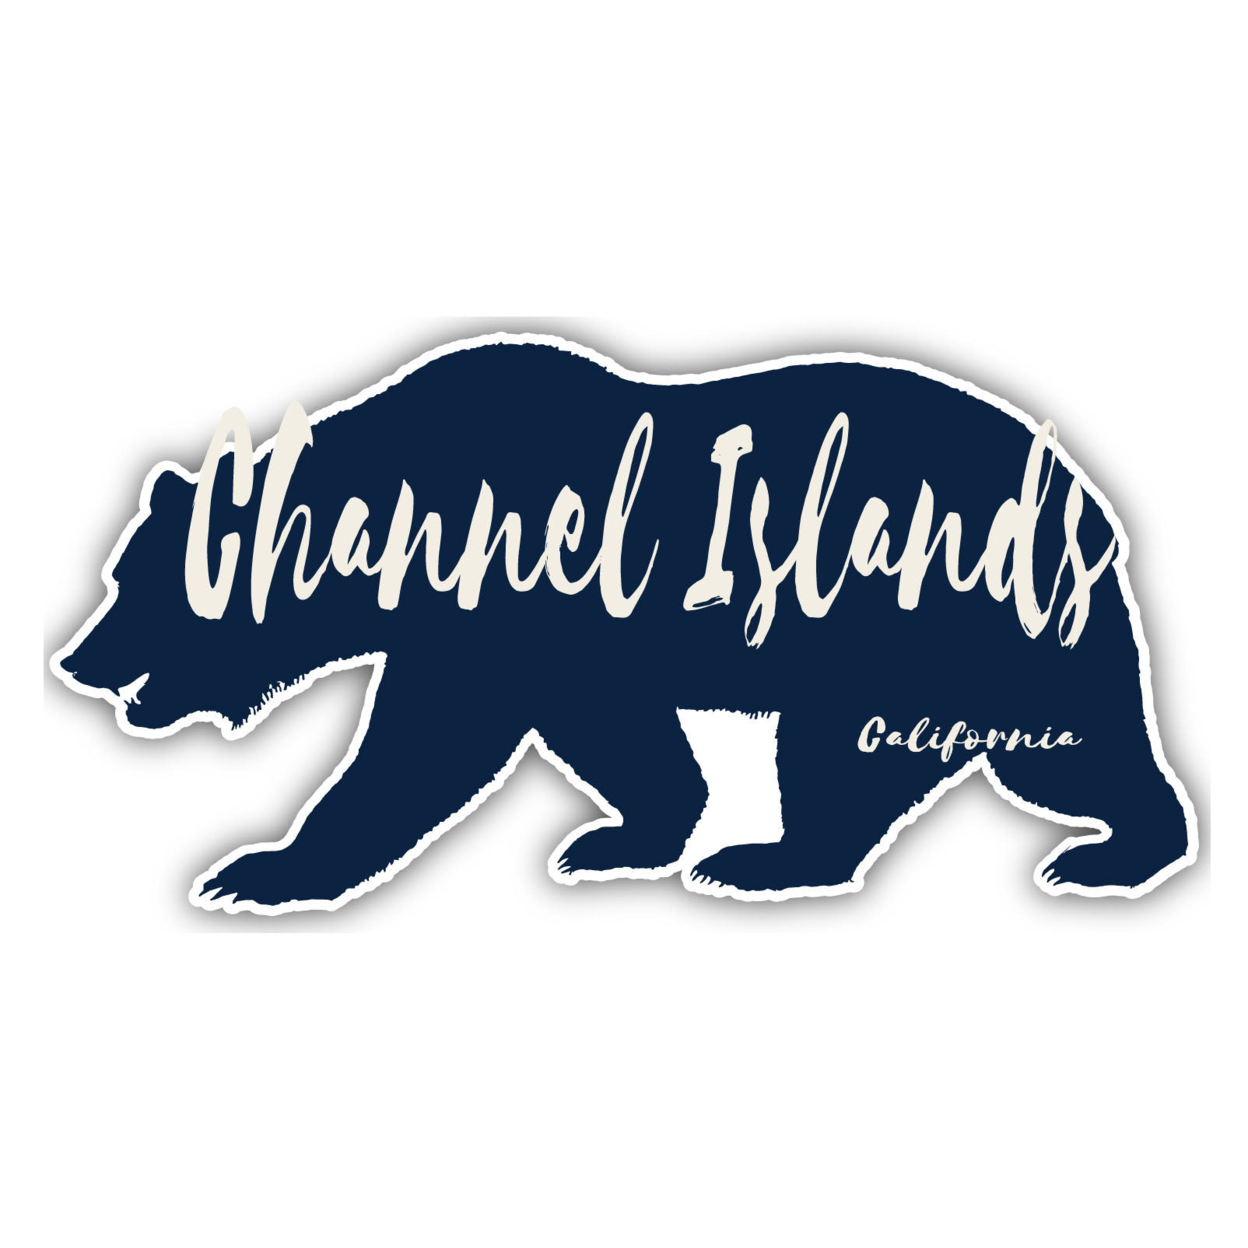 Channel Islands California Souvenir Decorative Stickers (Choose Theme And Size) - 4-Pack, 4-Inch, Bear